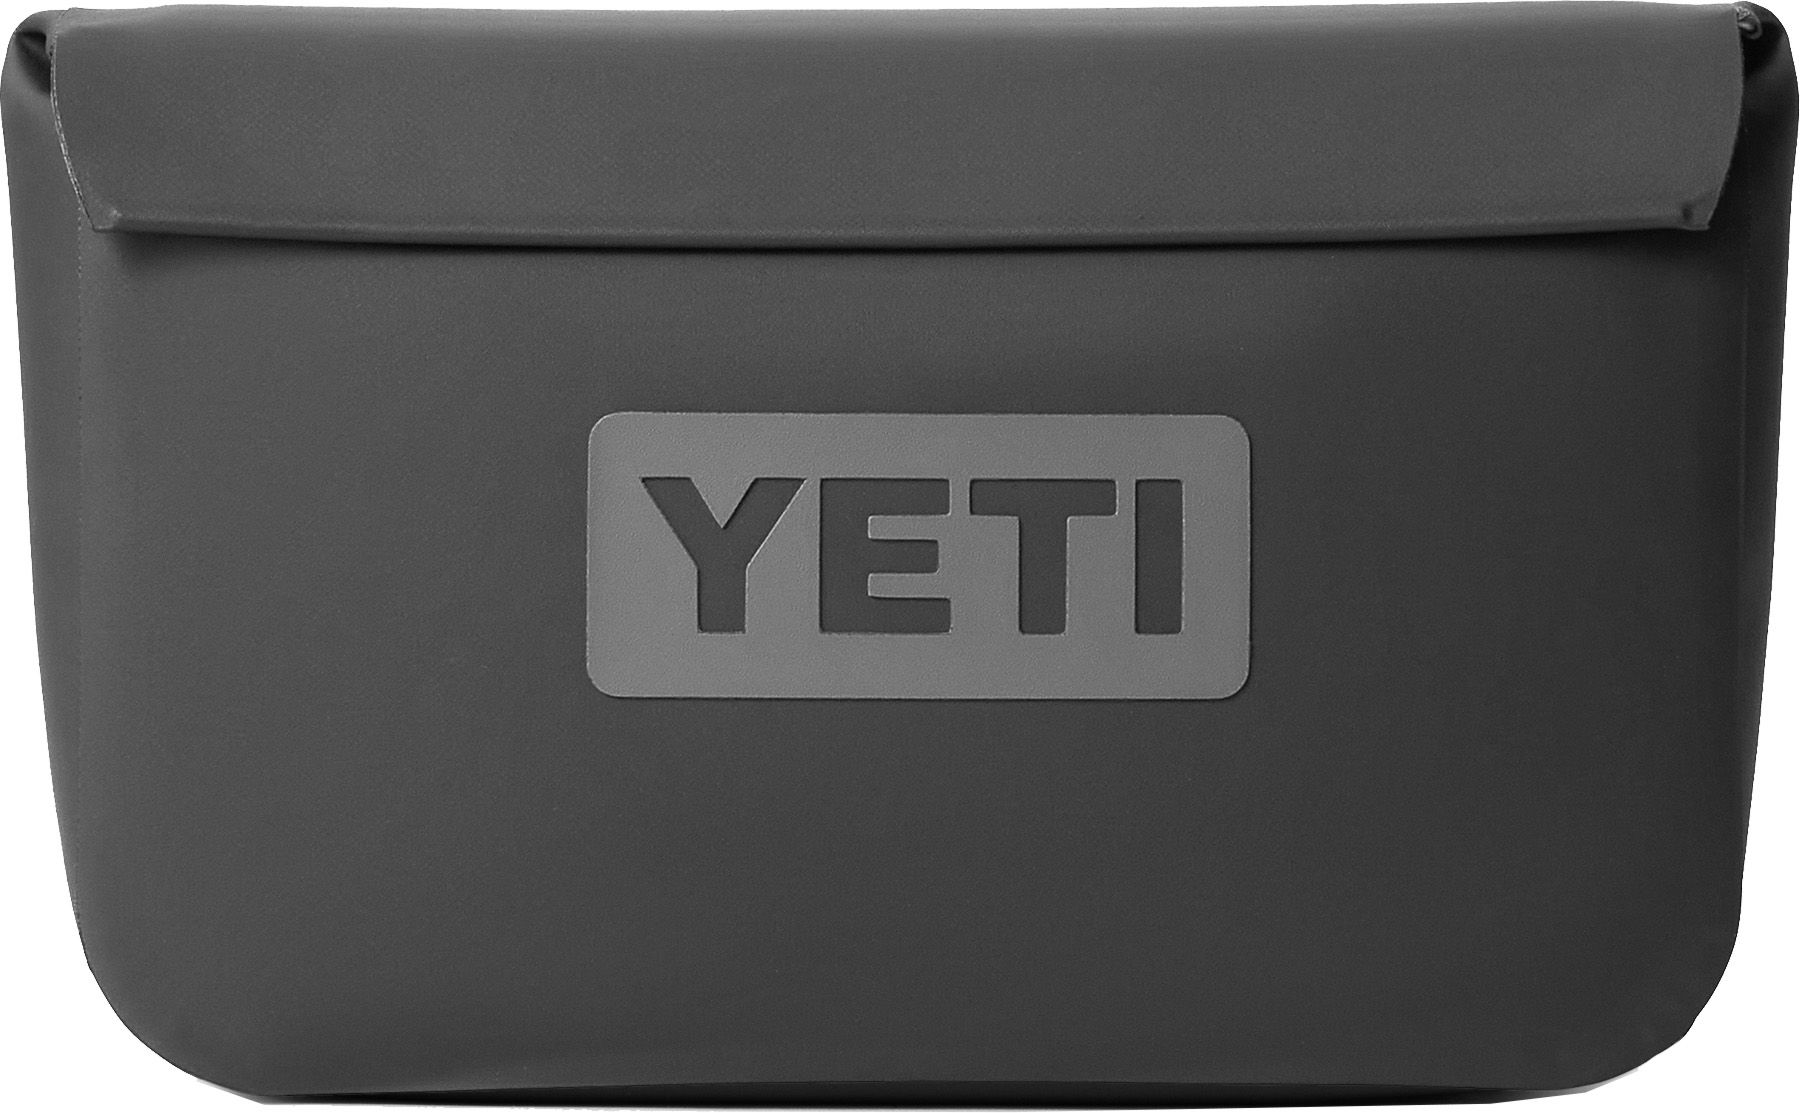 Photos - Cooler Bag Yeti Sidekick Dry 3L Gear Case, Charcoal 23YETUSDKCKDRY3LXREC 